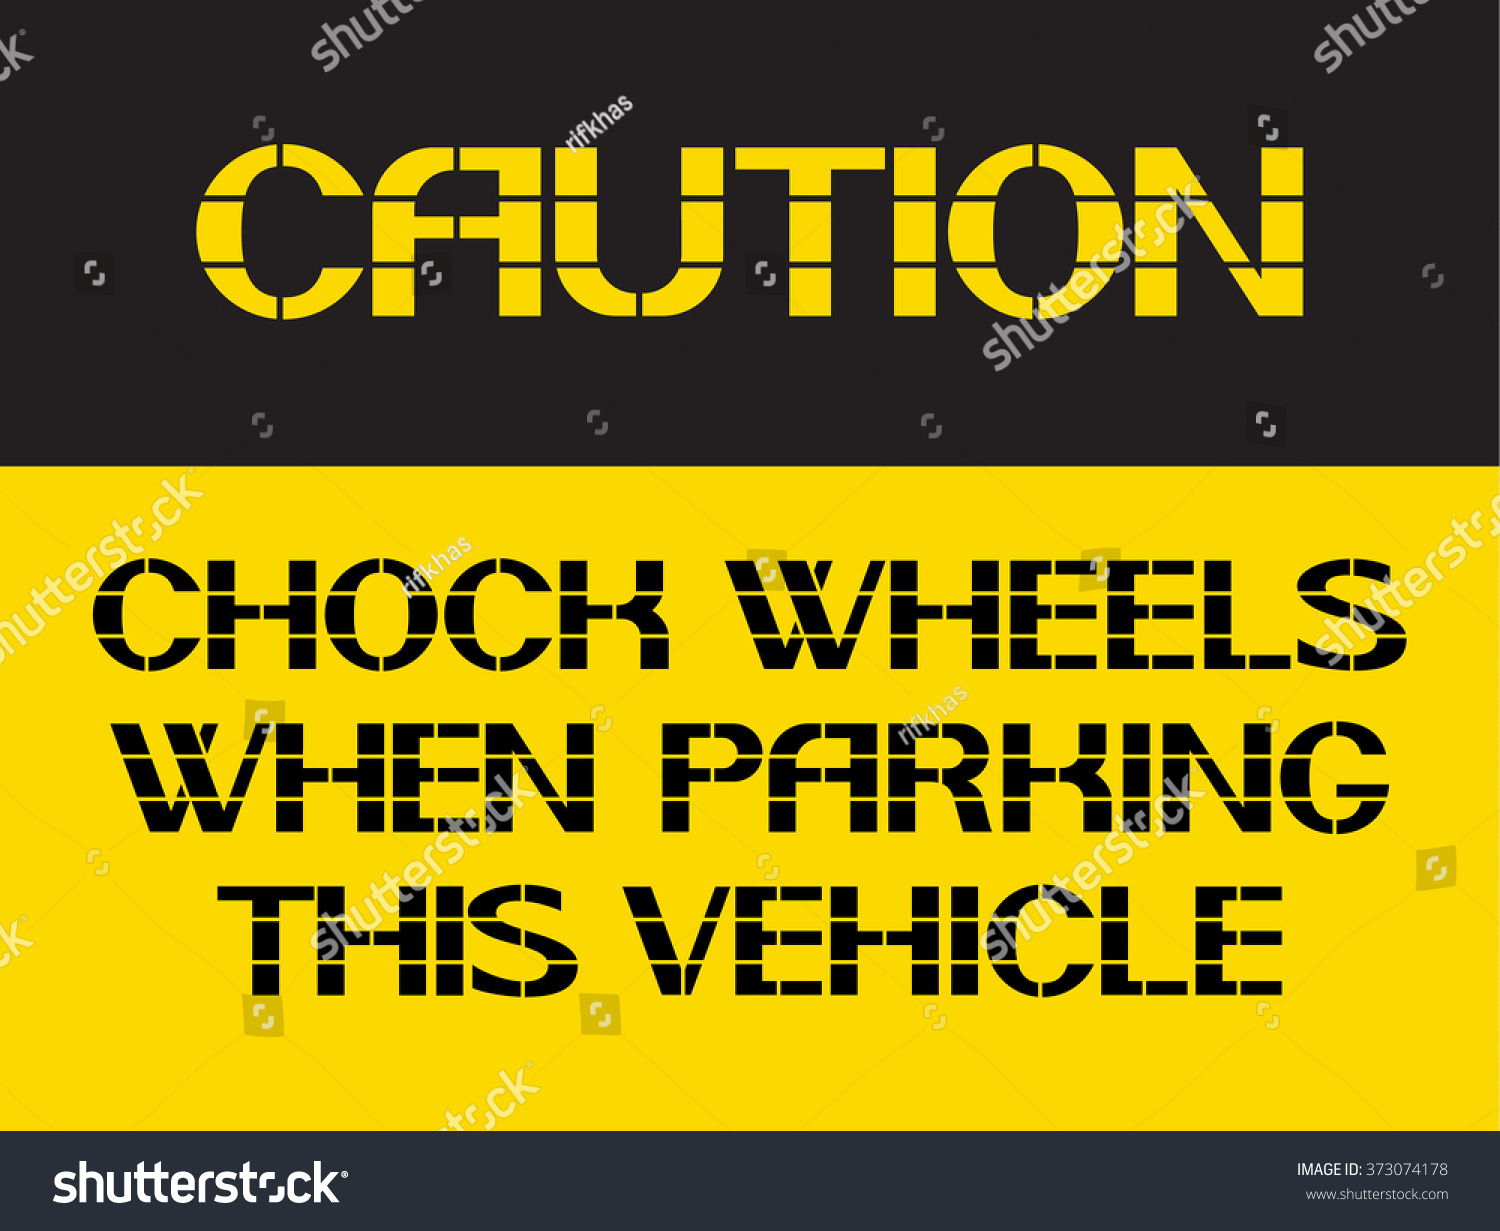 SVG of Chock wheels when parking this vehicle.
Advisory text for the driver of the car or repair technician mechanic. svg